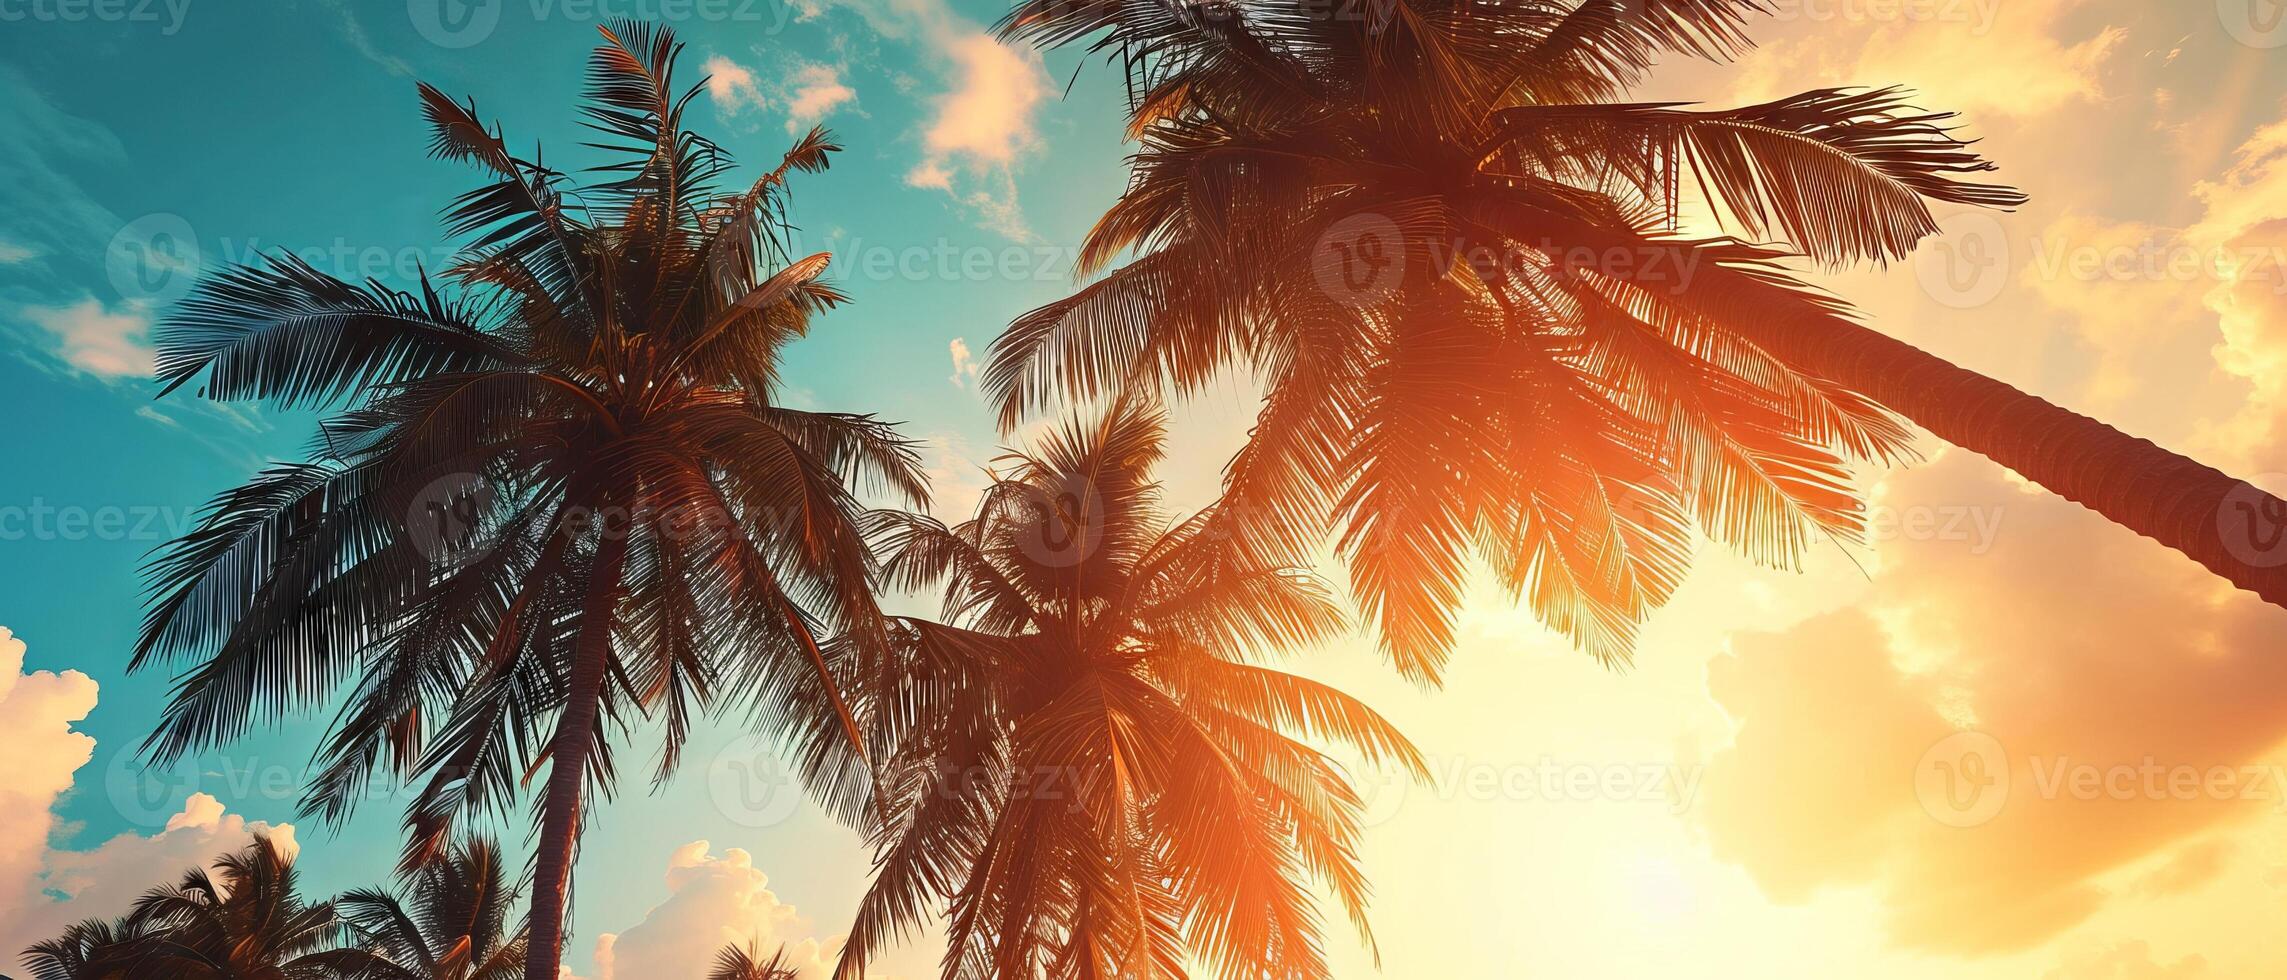 AI generated Transport yourself to a serene oasis with this vintage-inspired image capturing the beauty of palm trees against a backdrop of a stunning sunset photo